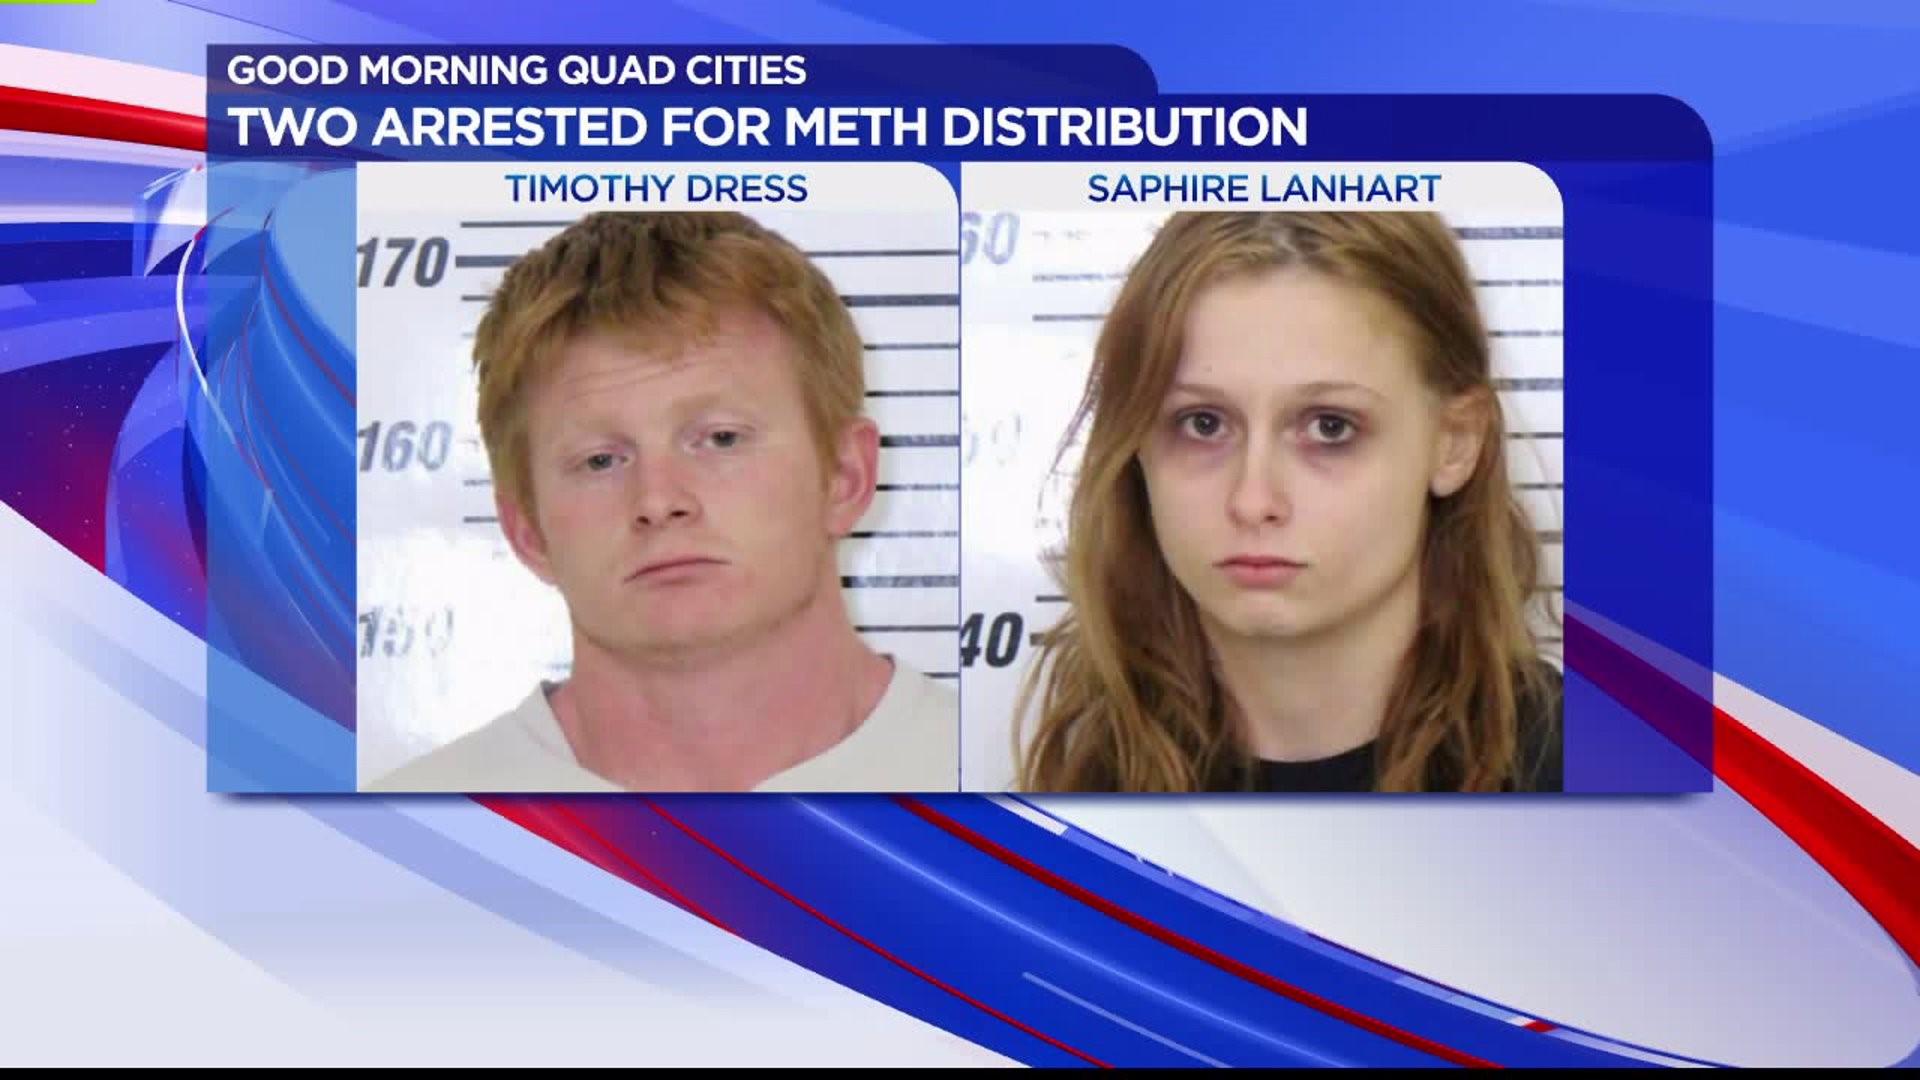 Two Arrested for Meth Distribution